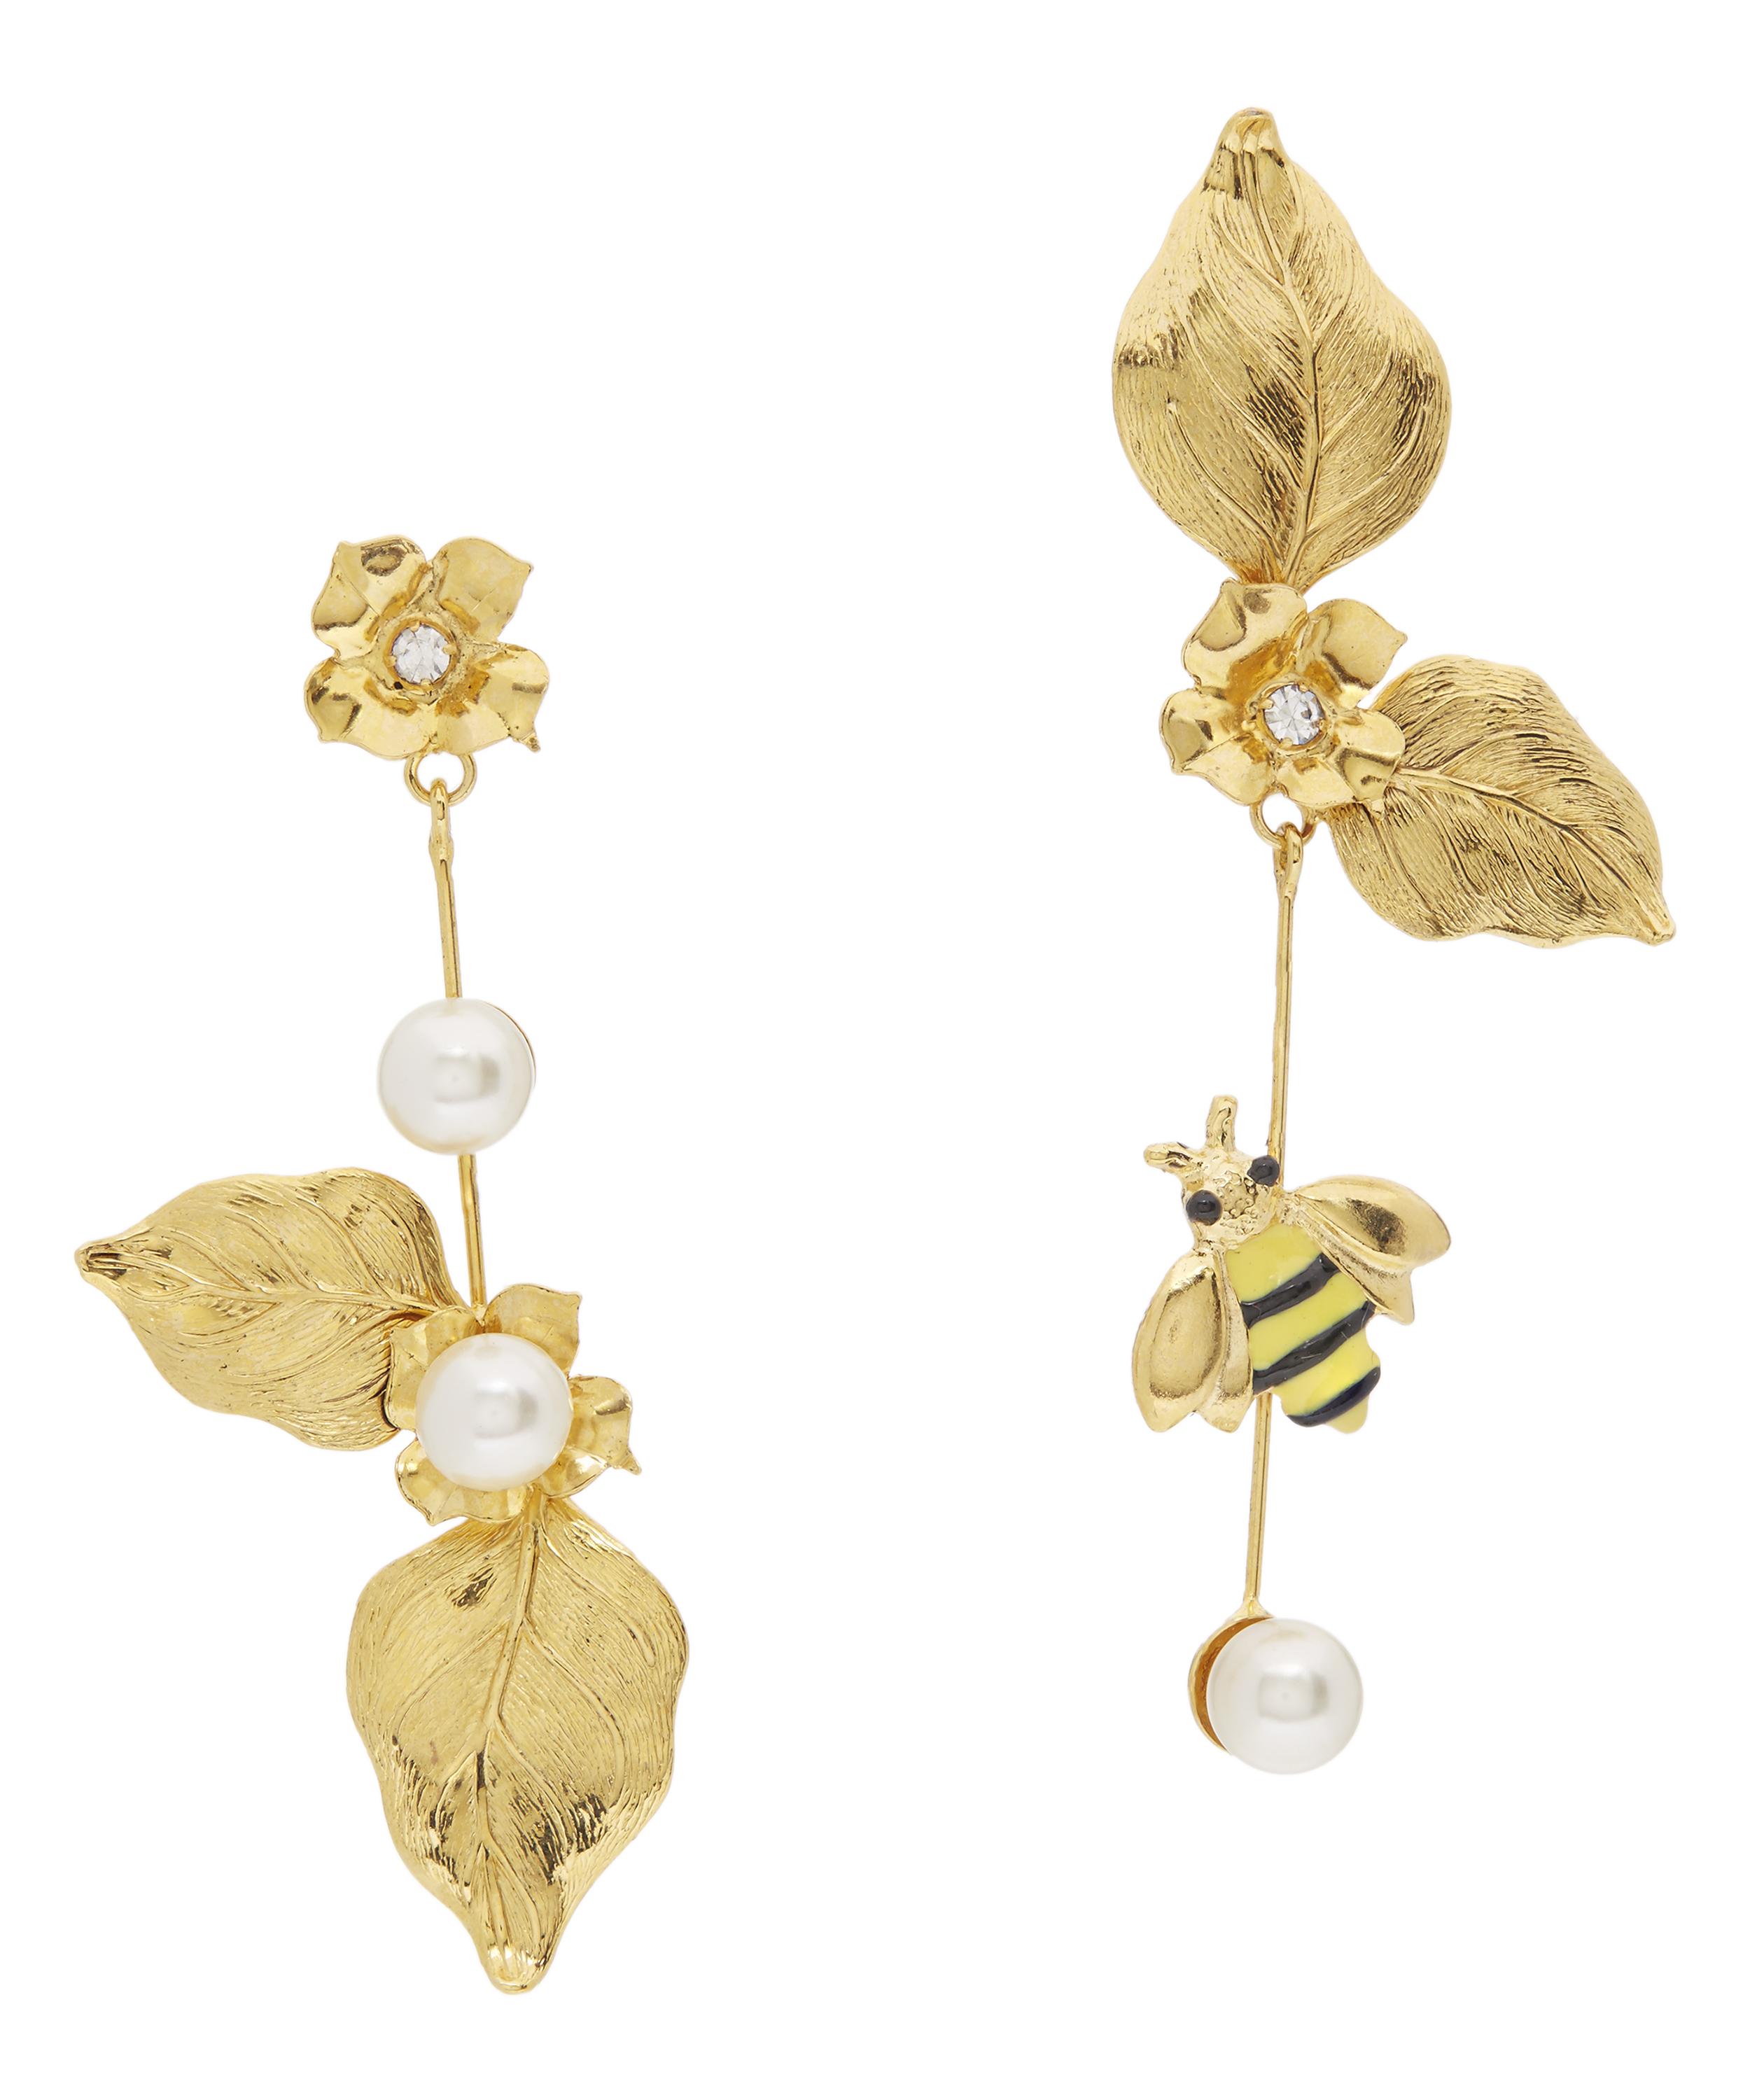 JENNIFER BEHR GOLD-PLATED FLOWER AND BEE EARRINGS